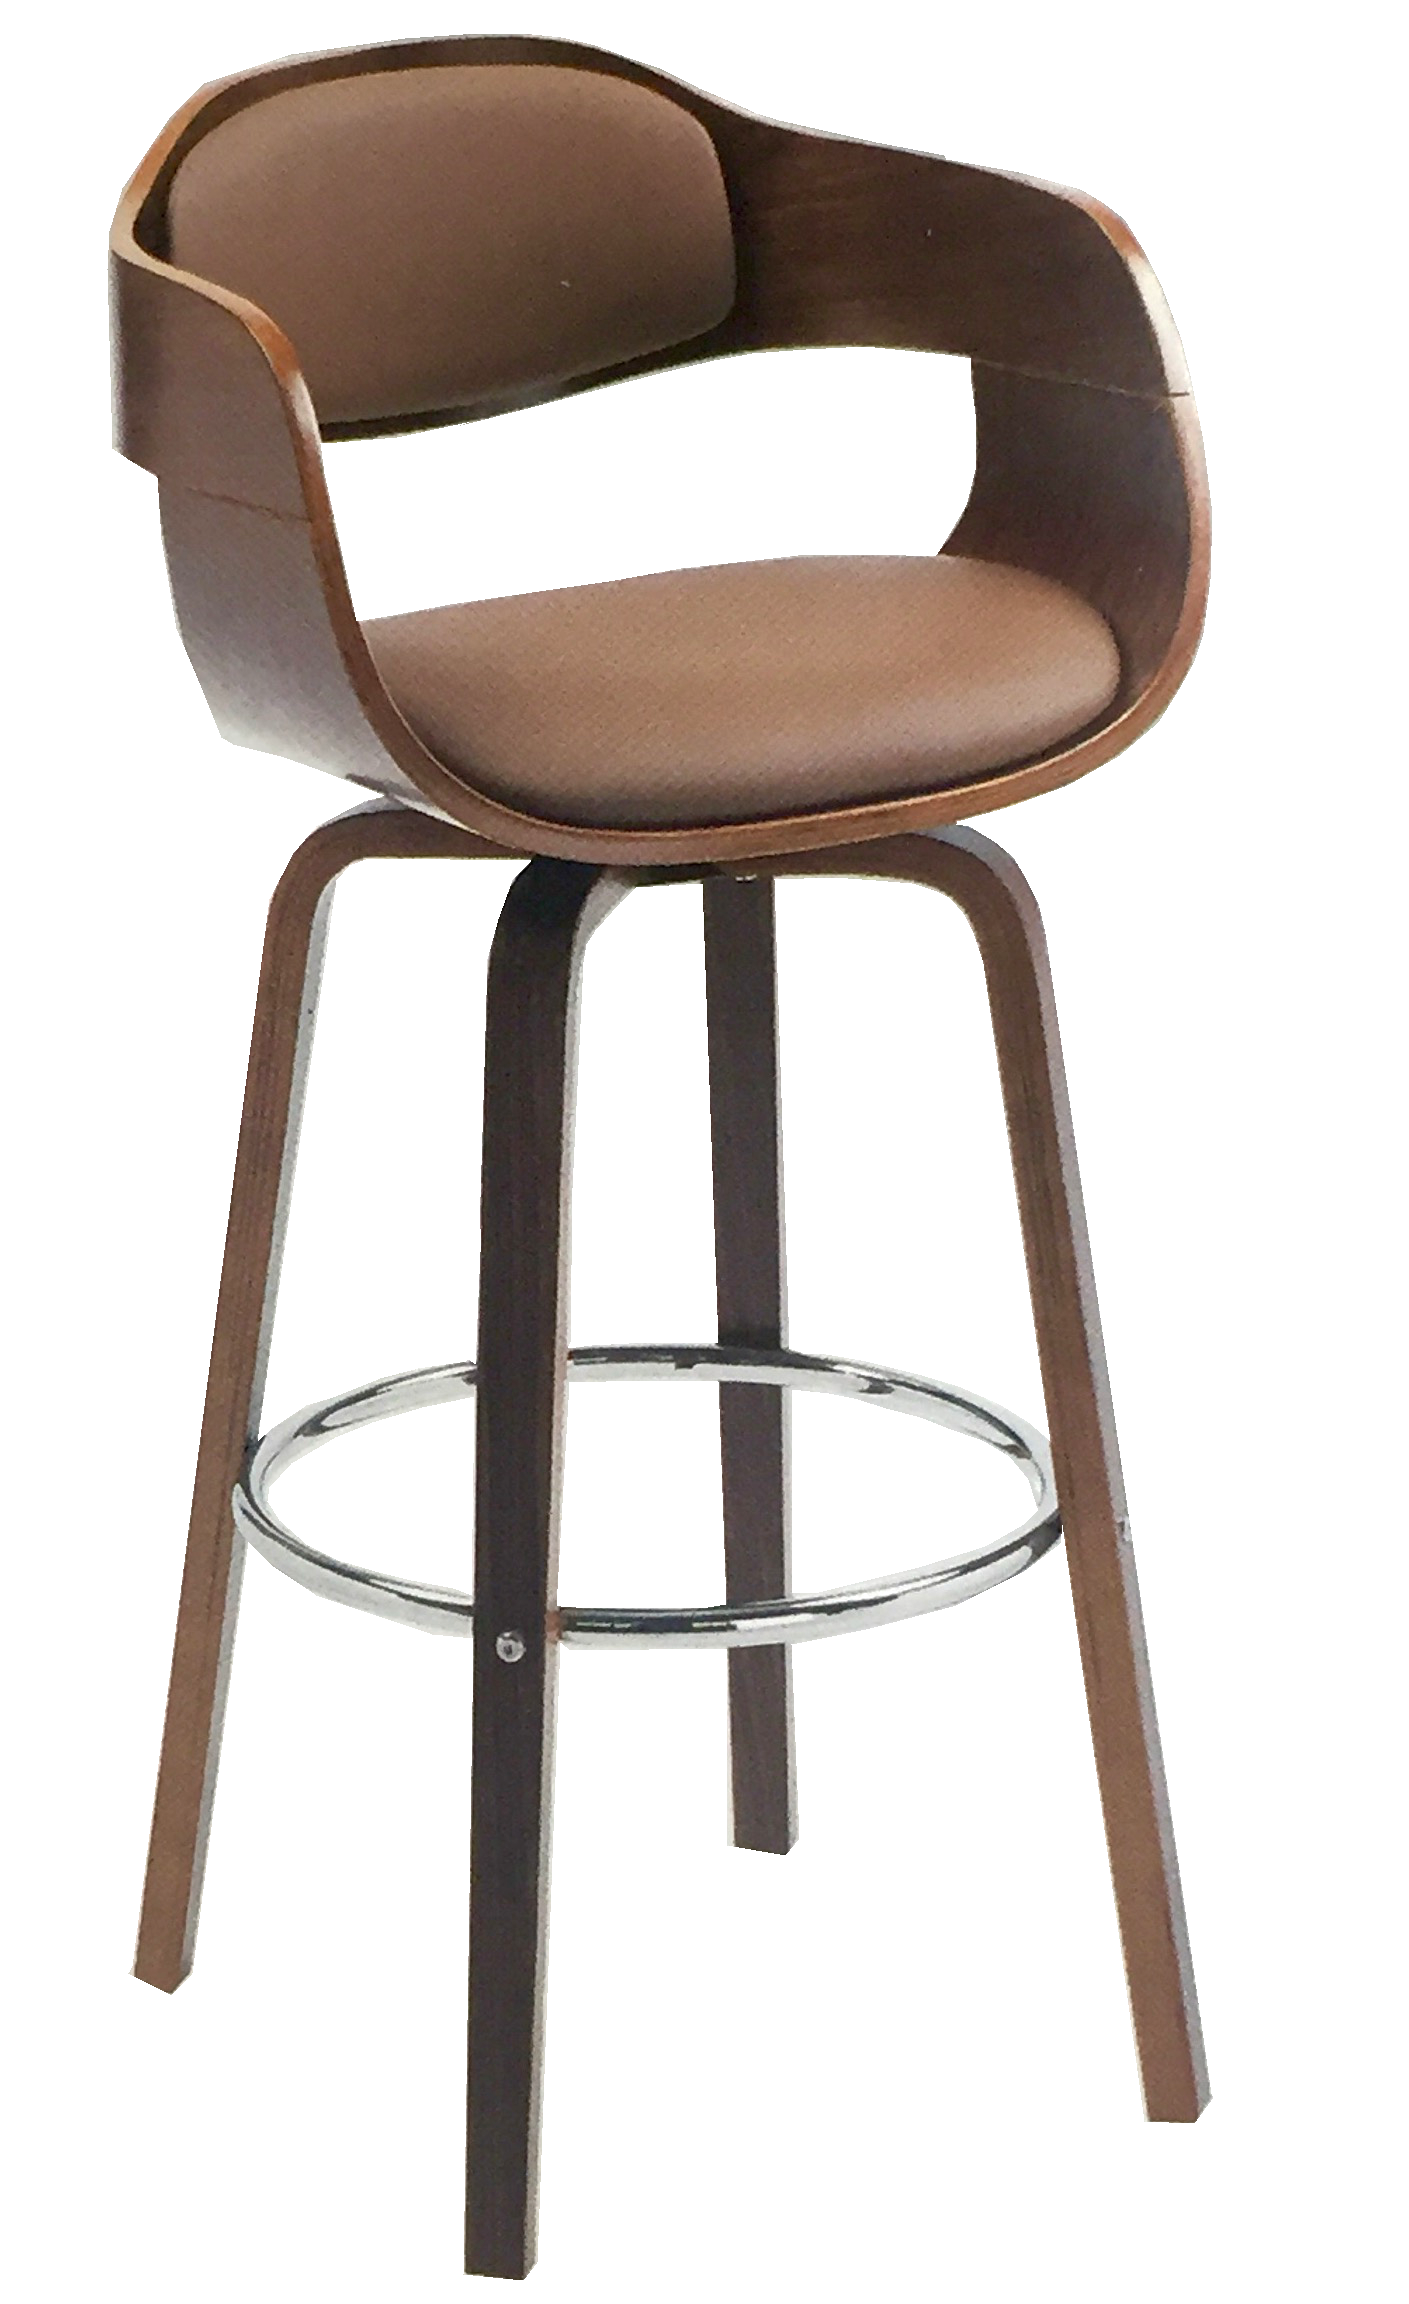 Bentwood Barstool With Wooden Leg And Leather Seat